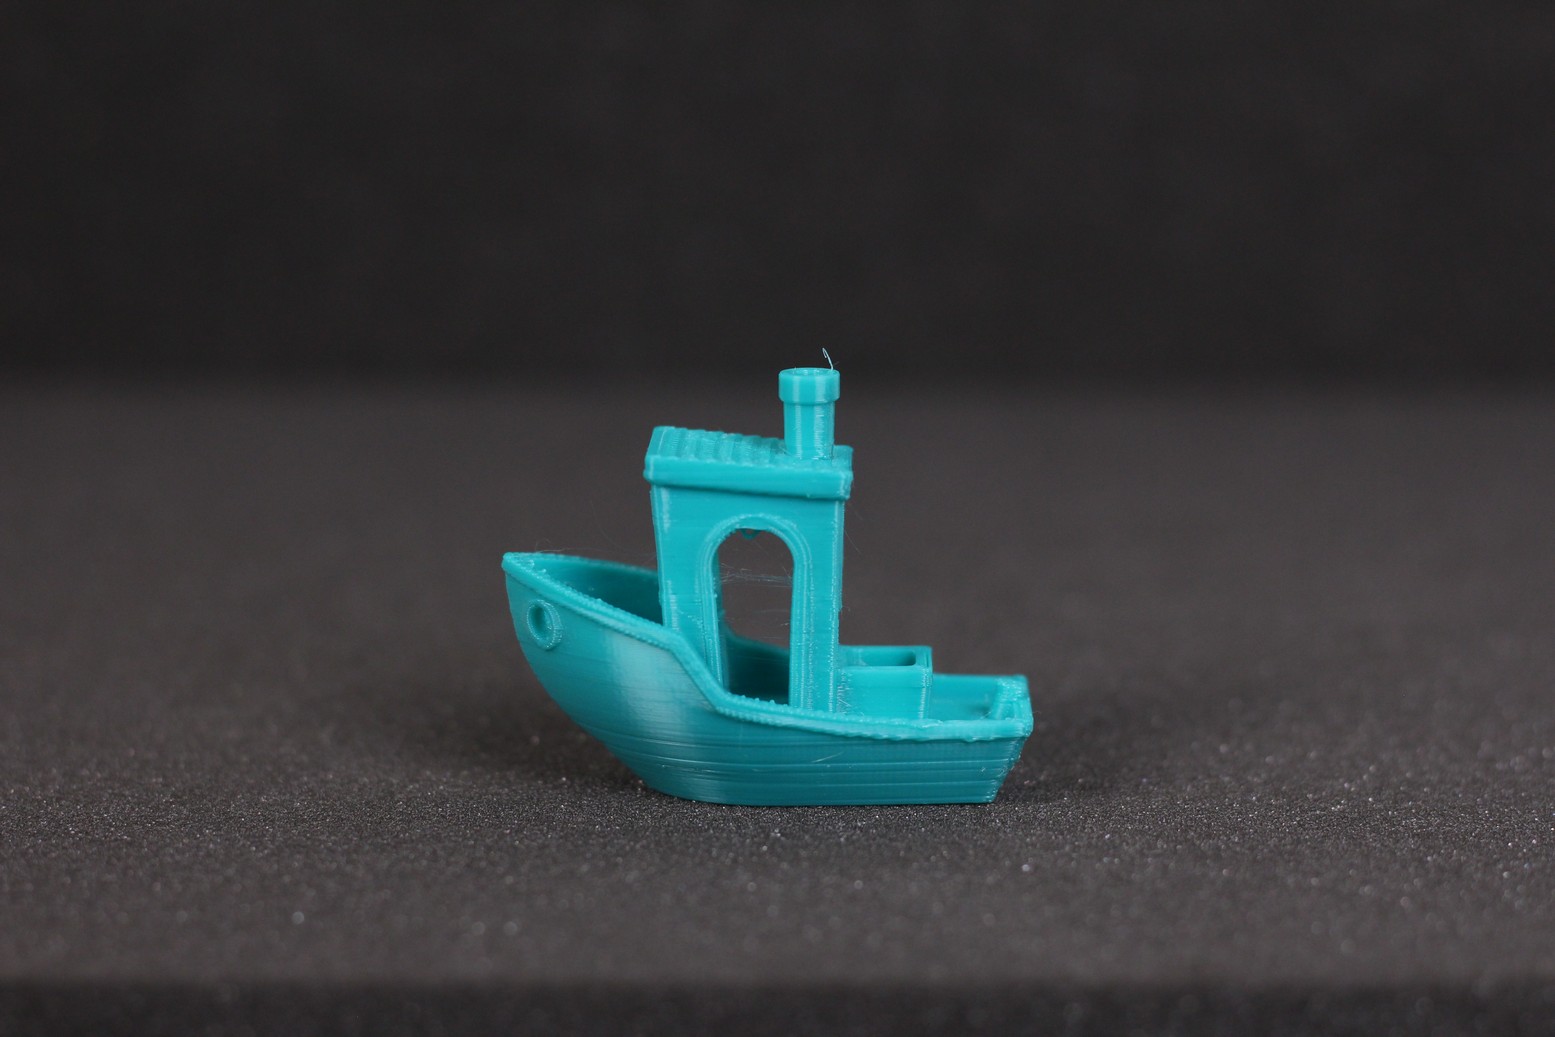 Ender 2 Pro 3D Benchy 4 | Creality Ender 2 Pro Review: Is it worth it?